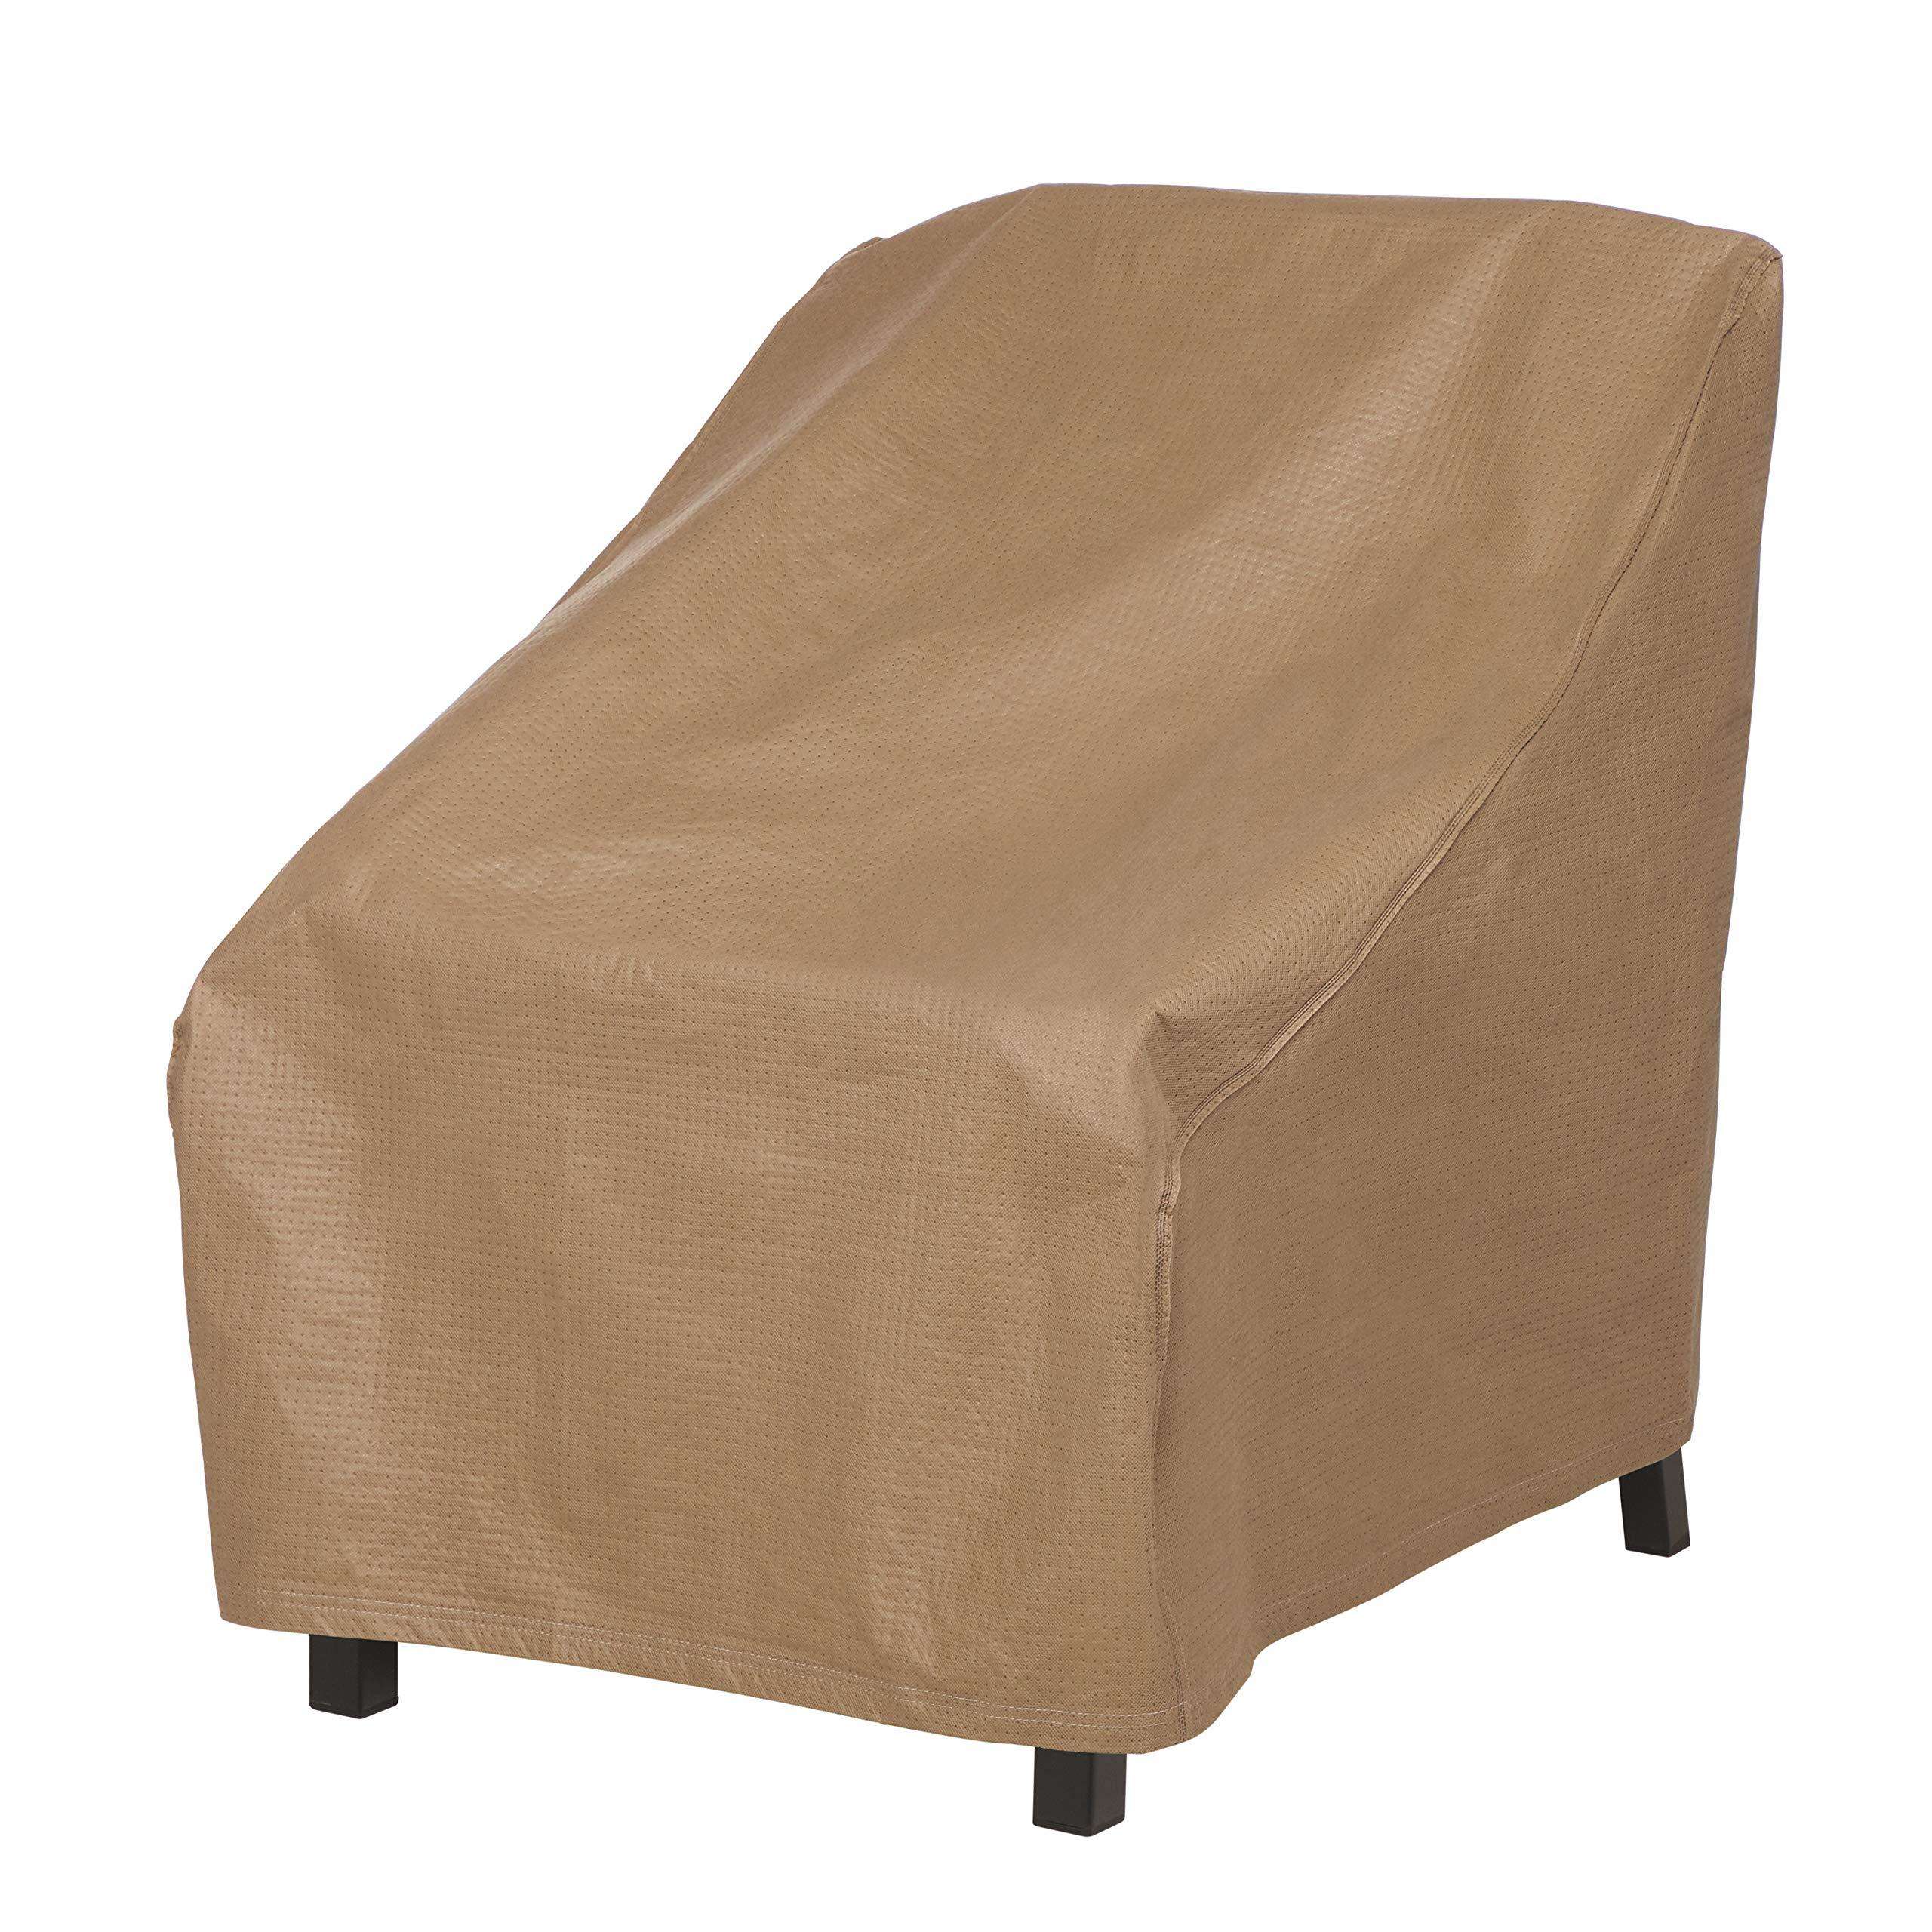 Duck Covers Essential Patio Chair Cover, 32